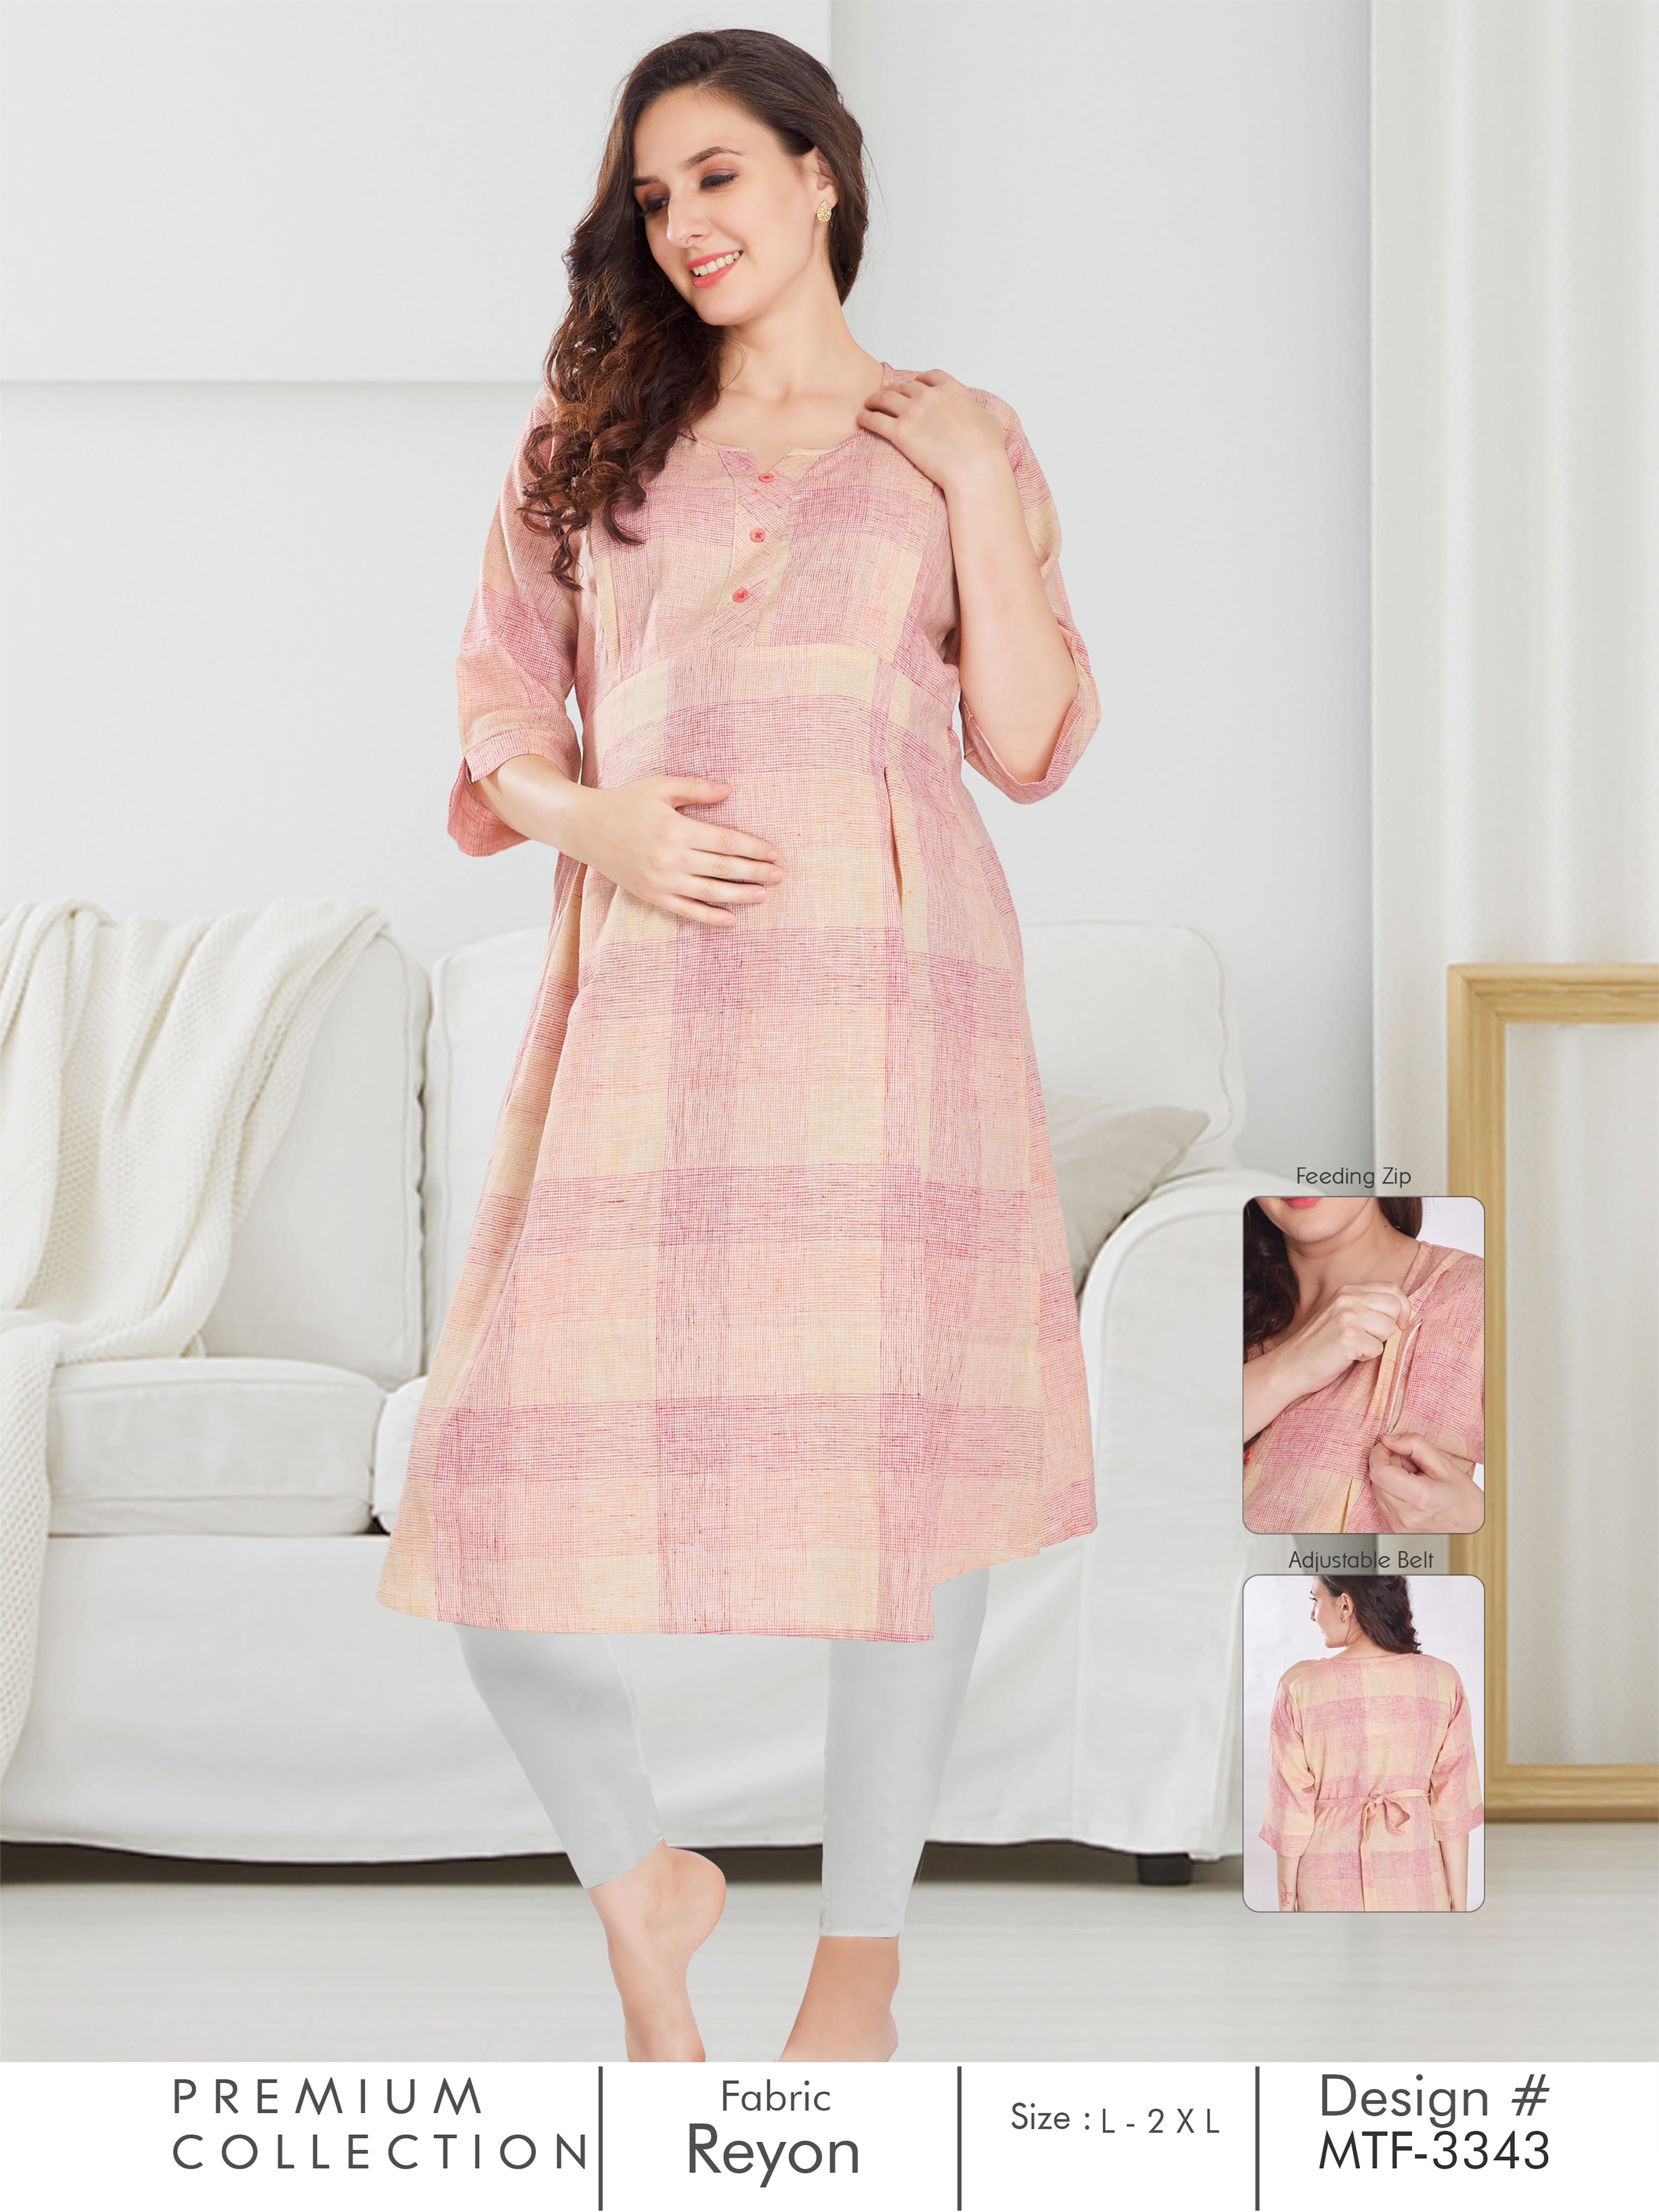 S2M-04 - SAFWA DIGITAL PRINT 2-PIECE MOTHER COLLECTION VOL 01 – SAFWA Brand